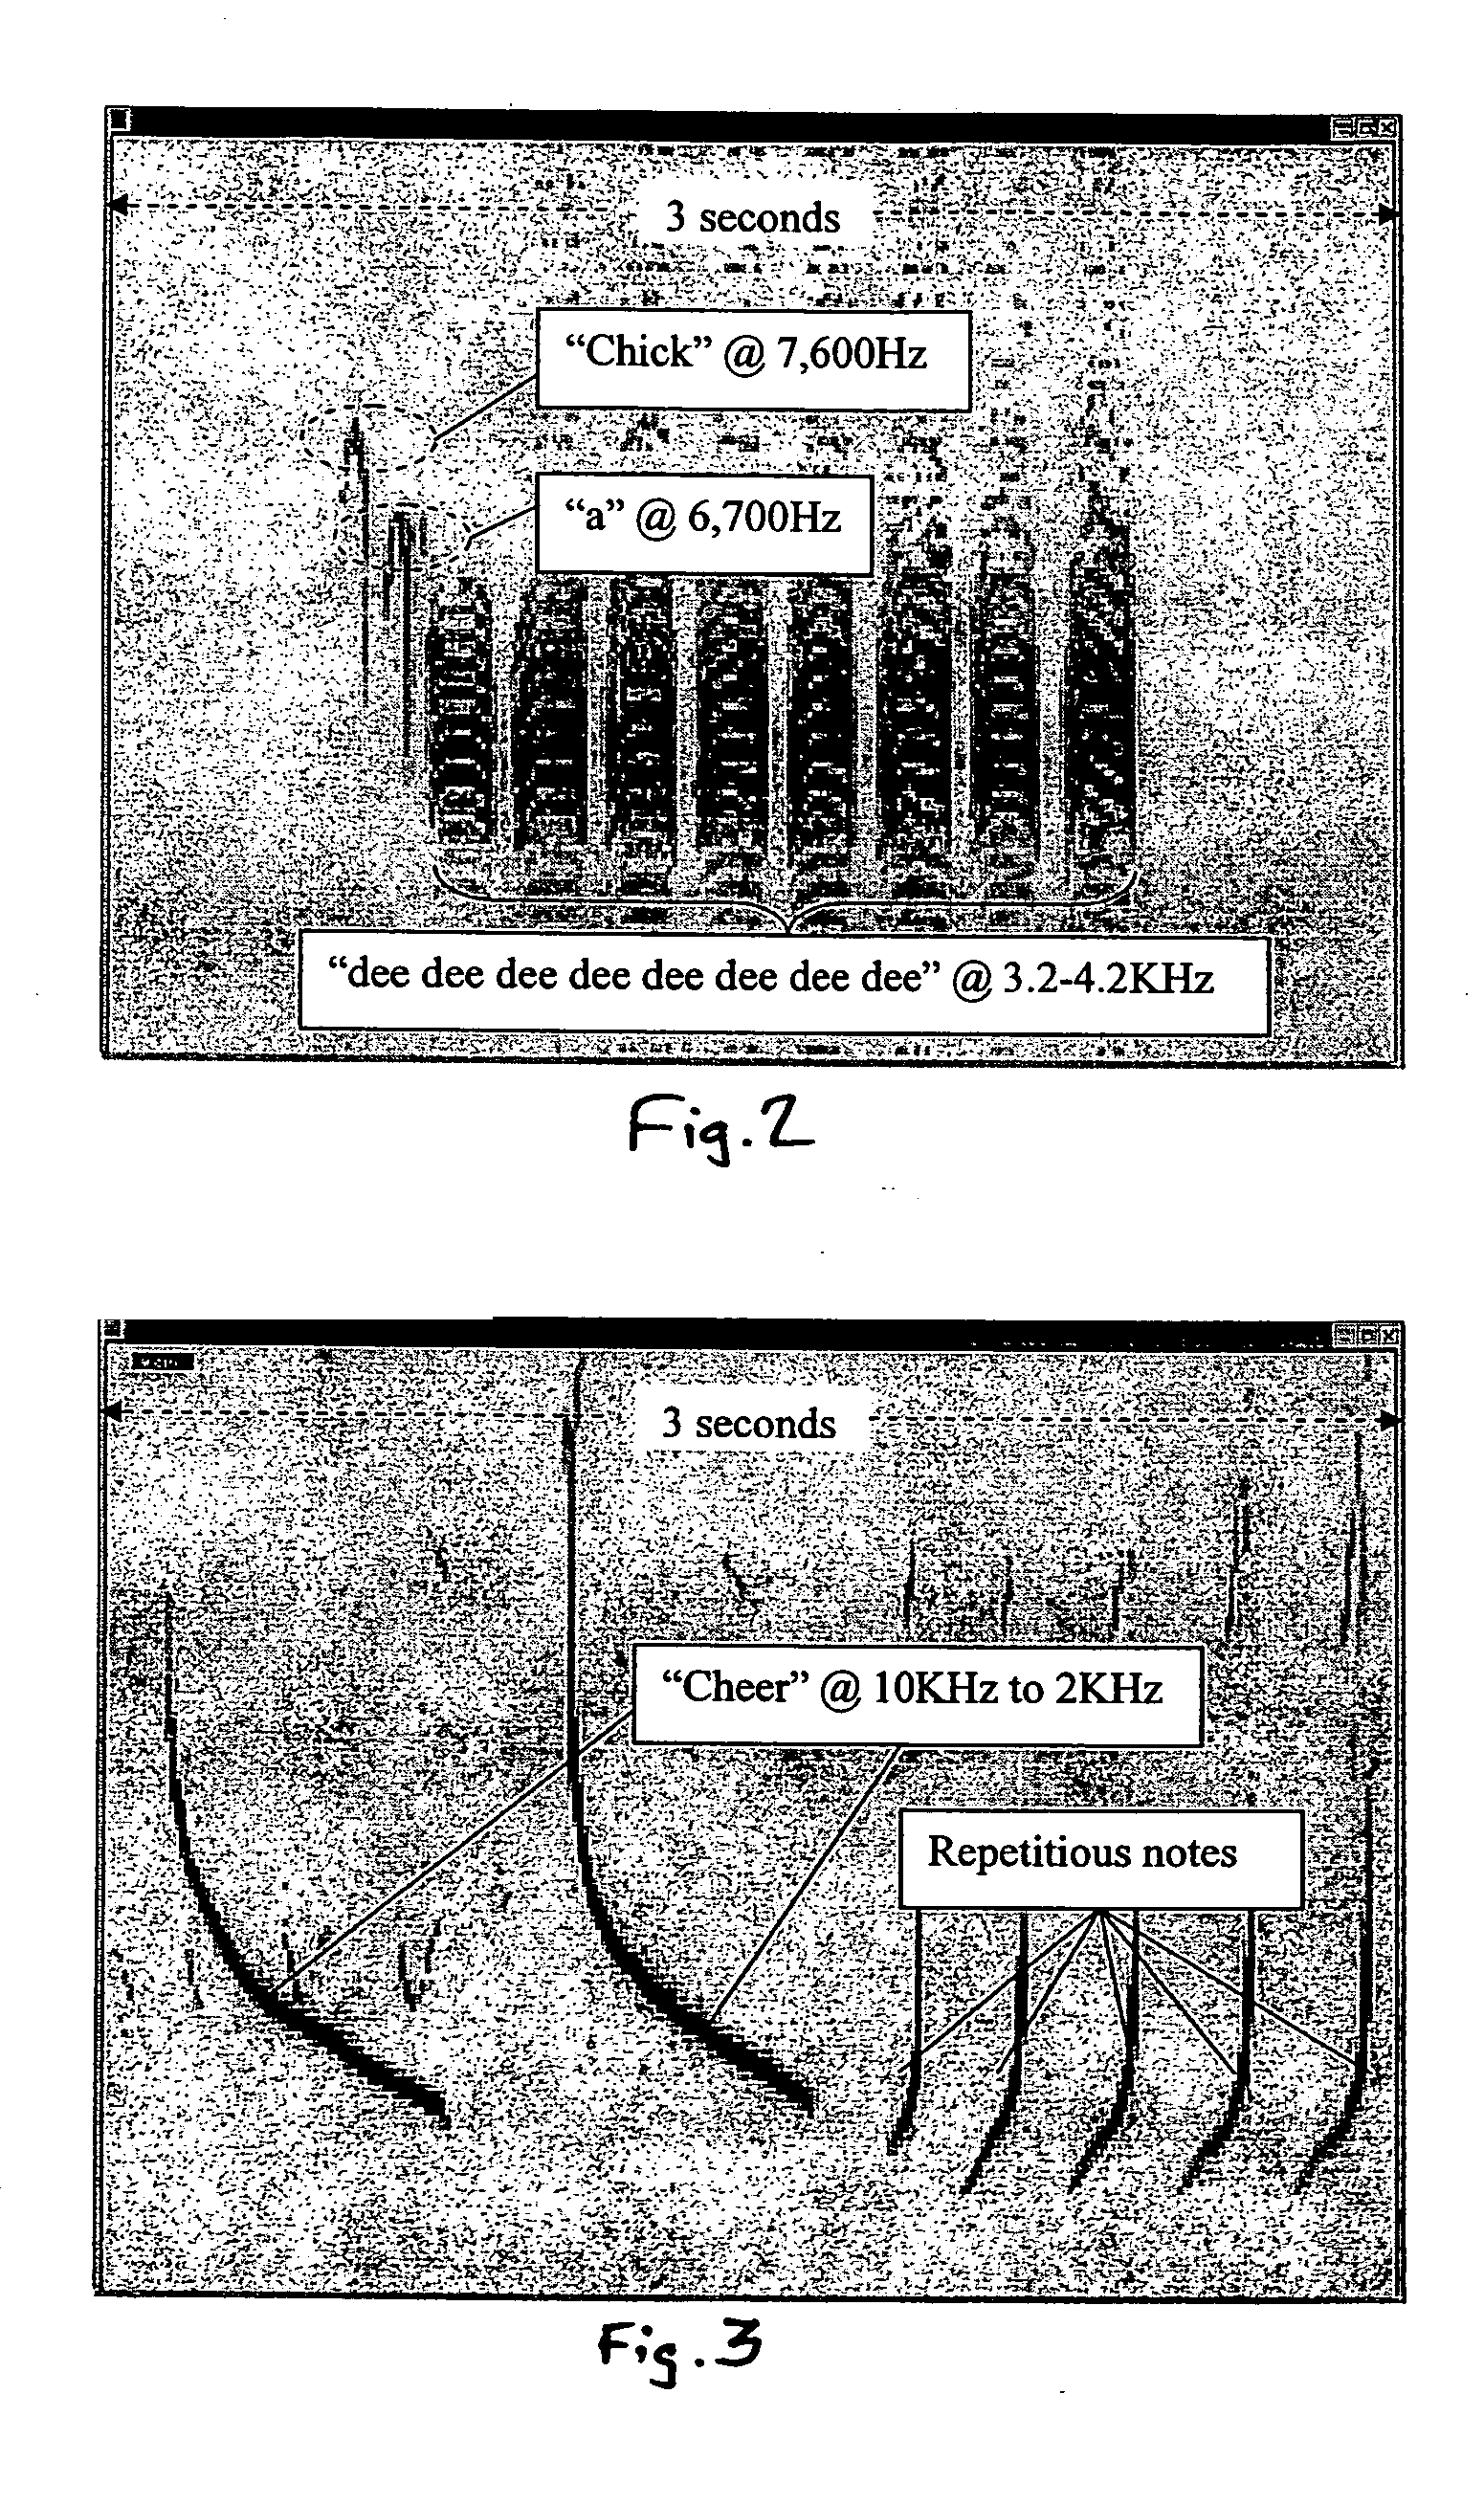 Method and apparatus for automatically identifying animal species from their vocalizations